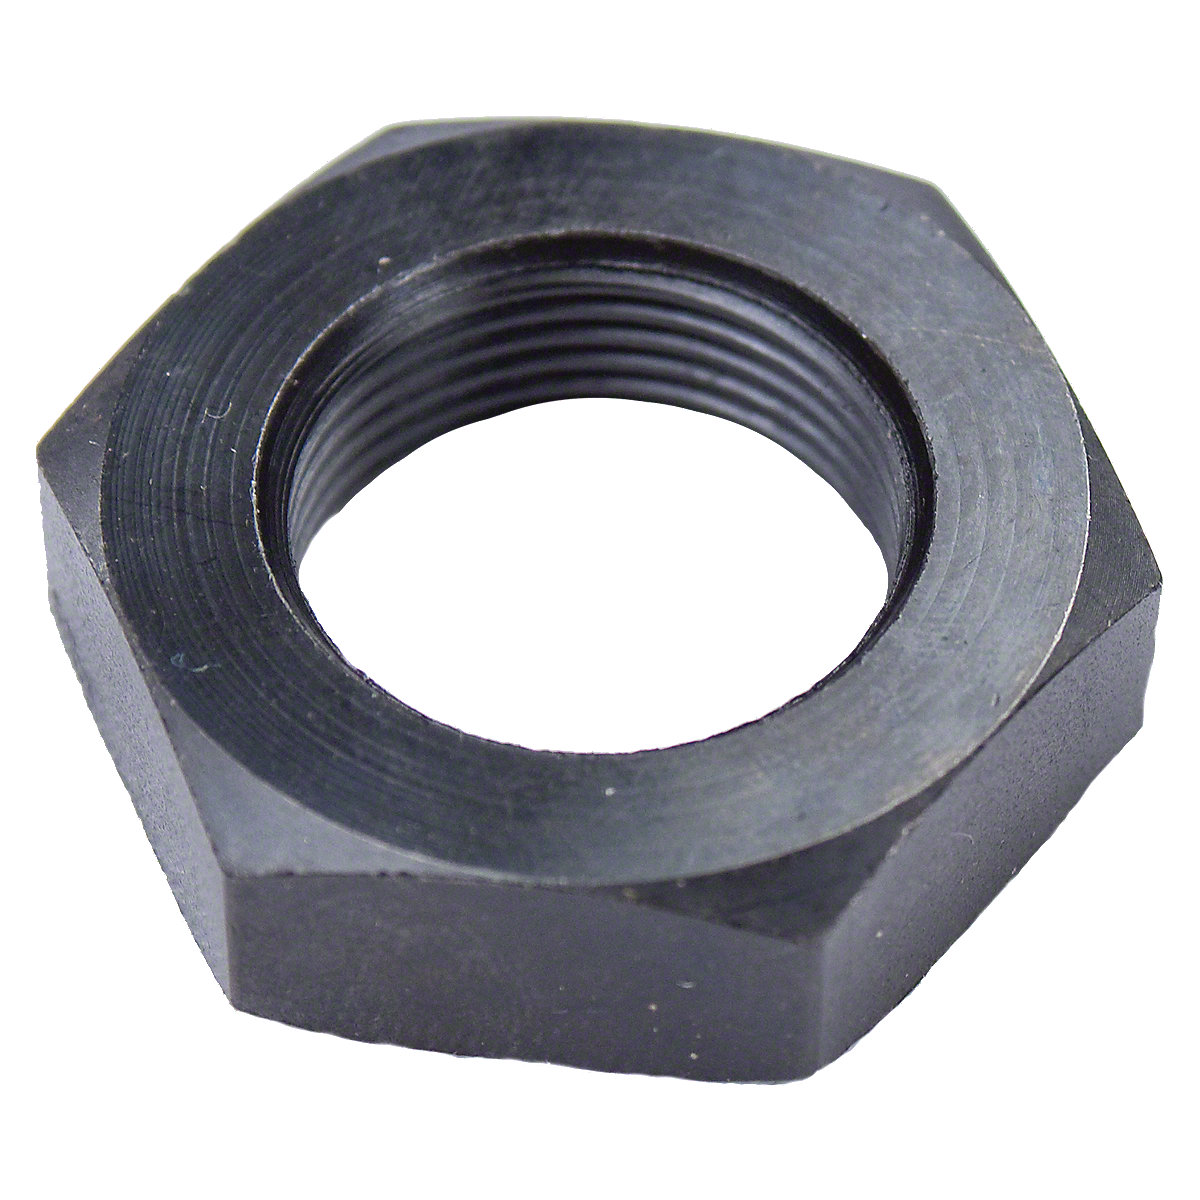 Fits: [ 1655, 1755, 1855, 1955, 2255 (with Char-Lynn power steering) ]
13/16 - 20 NEF; Black Oxide